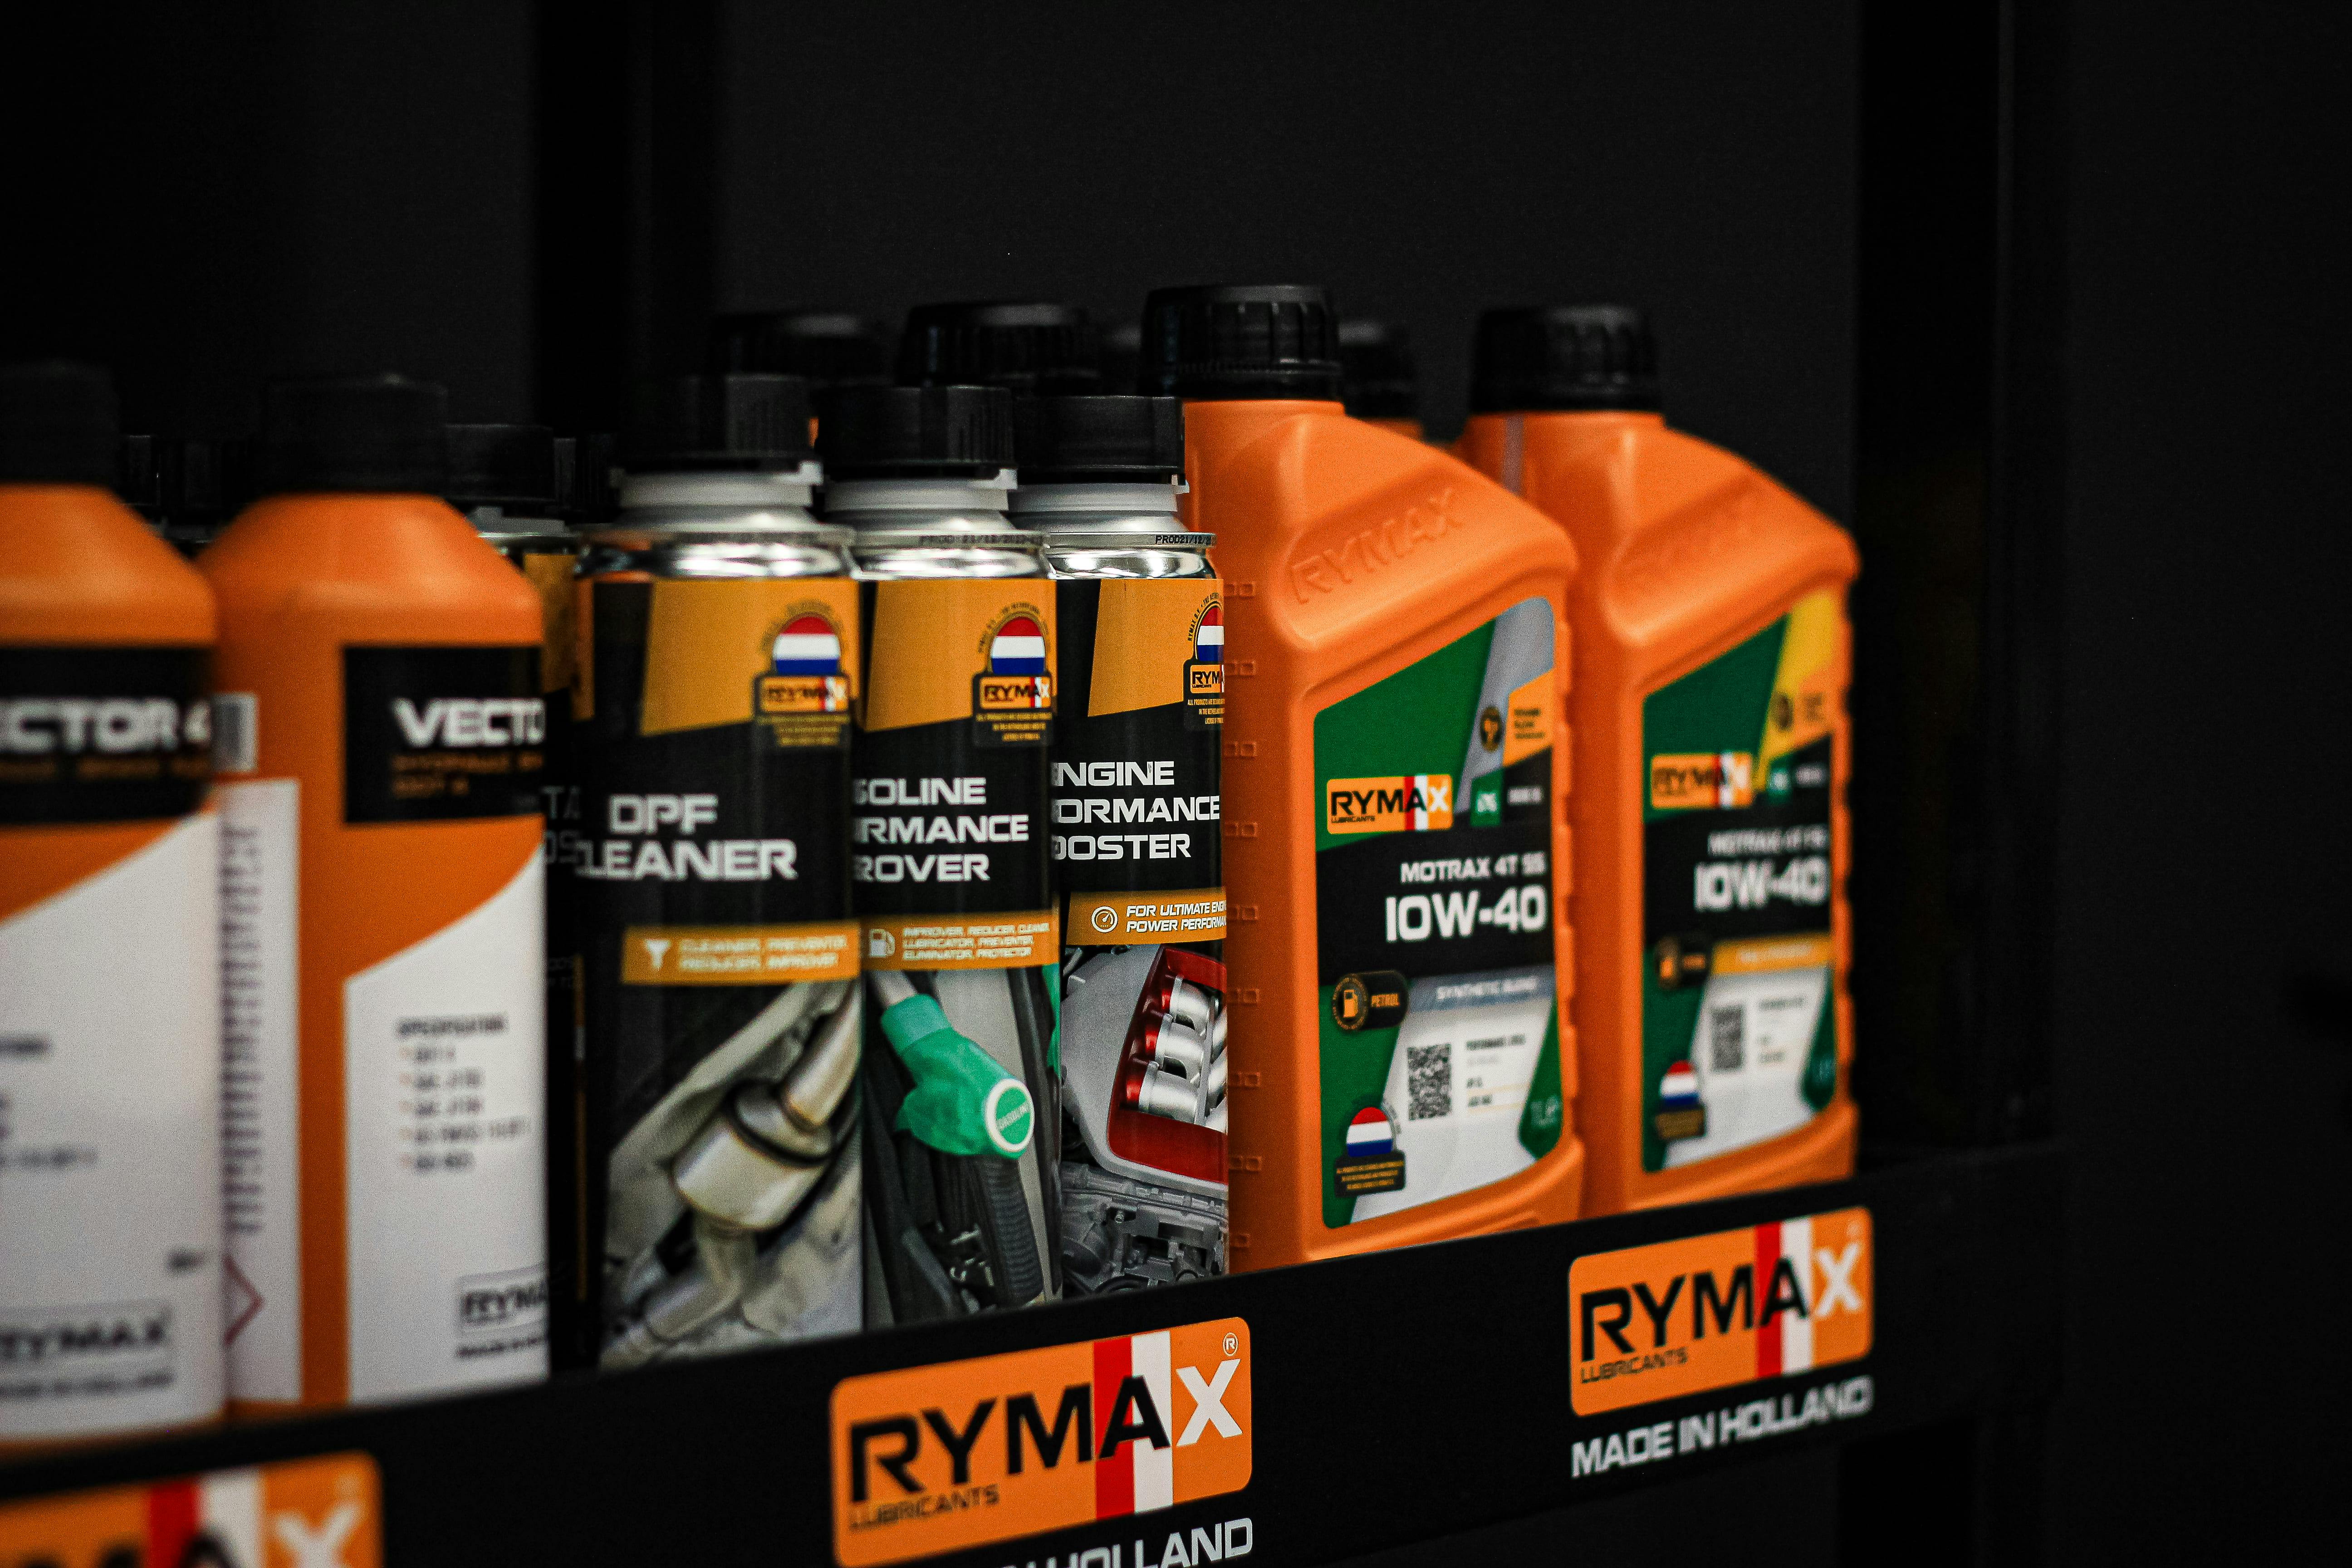 The new look of Rymax products not only shows top quality but also makes them really stand out on our display stand compared to other brands.